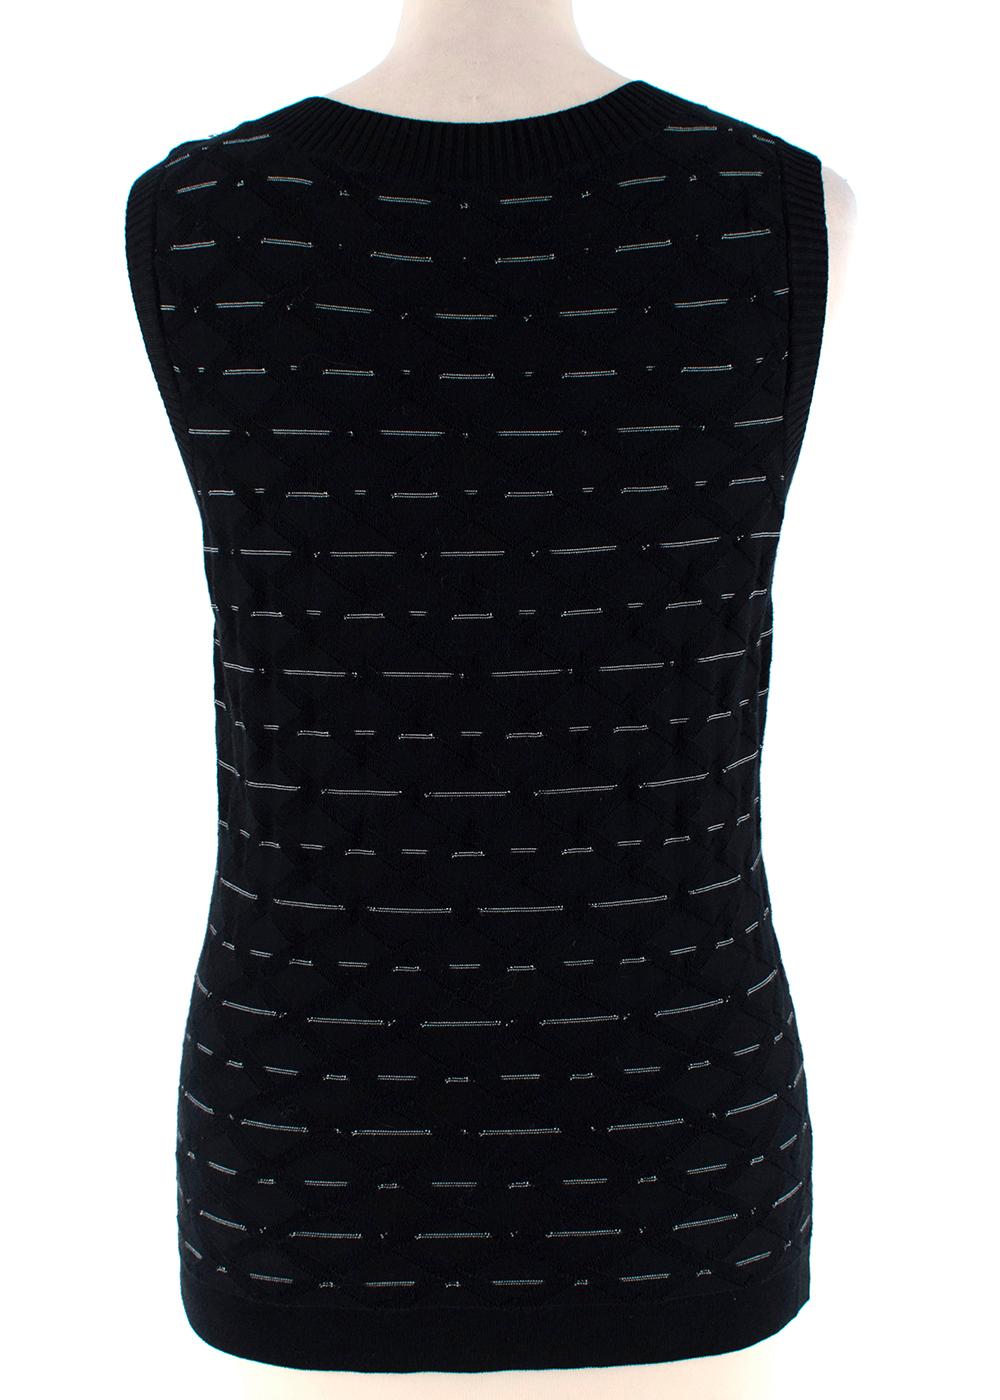 Chanel Black Camellia Embroidered Sleeveless Knit Vest - Size Estimated S In Excellent Condition For Sale In London, GB